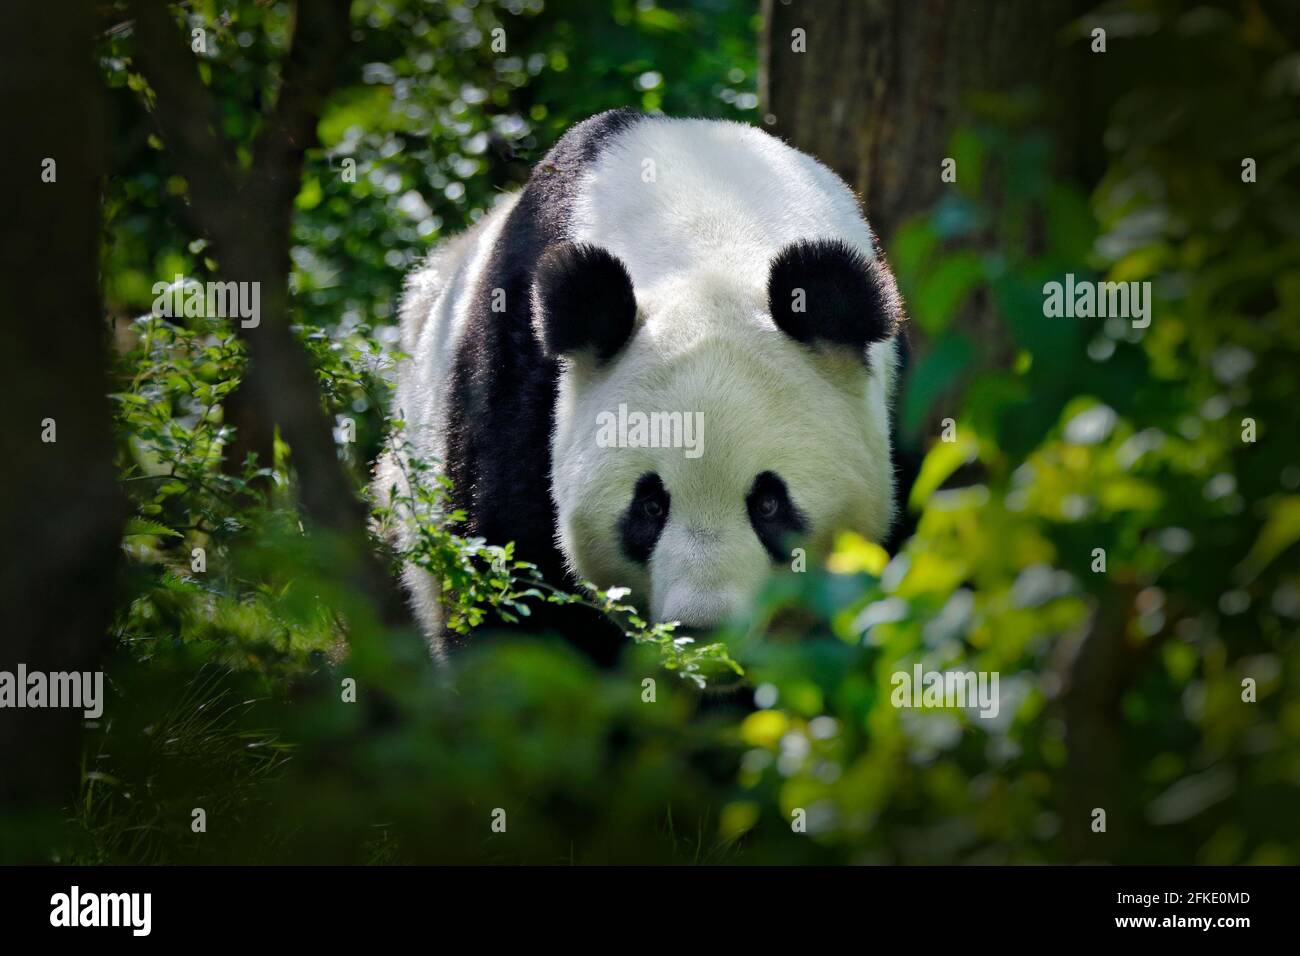 Panda in green forest vegetation.  Wildlife scene from China nature. Portrait of Giant Panda feeding on bamboo tree in forest. Cute black and white be Stock Photo